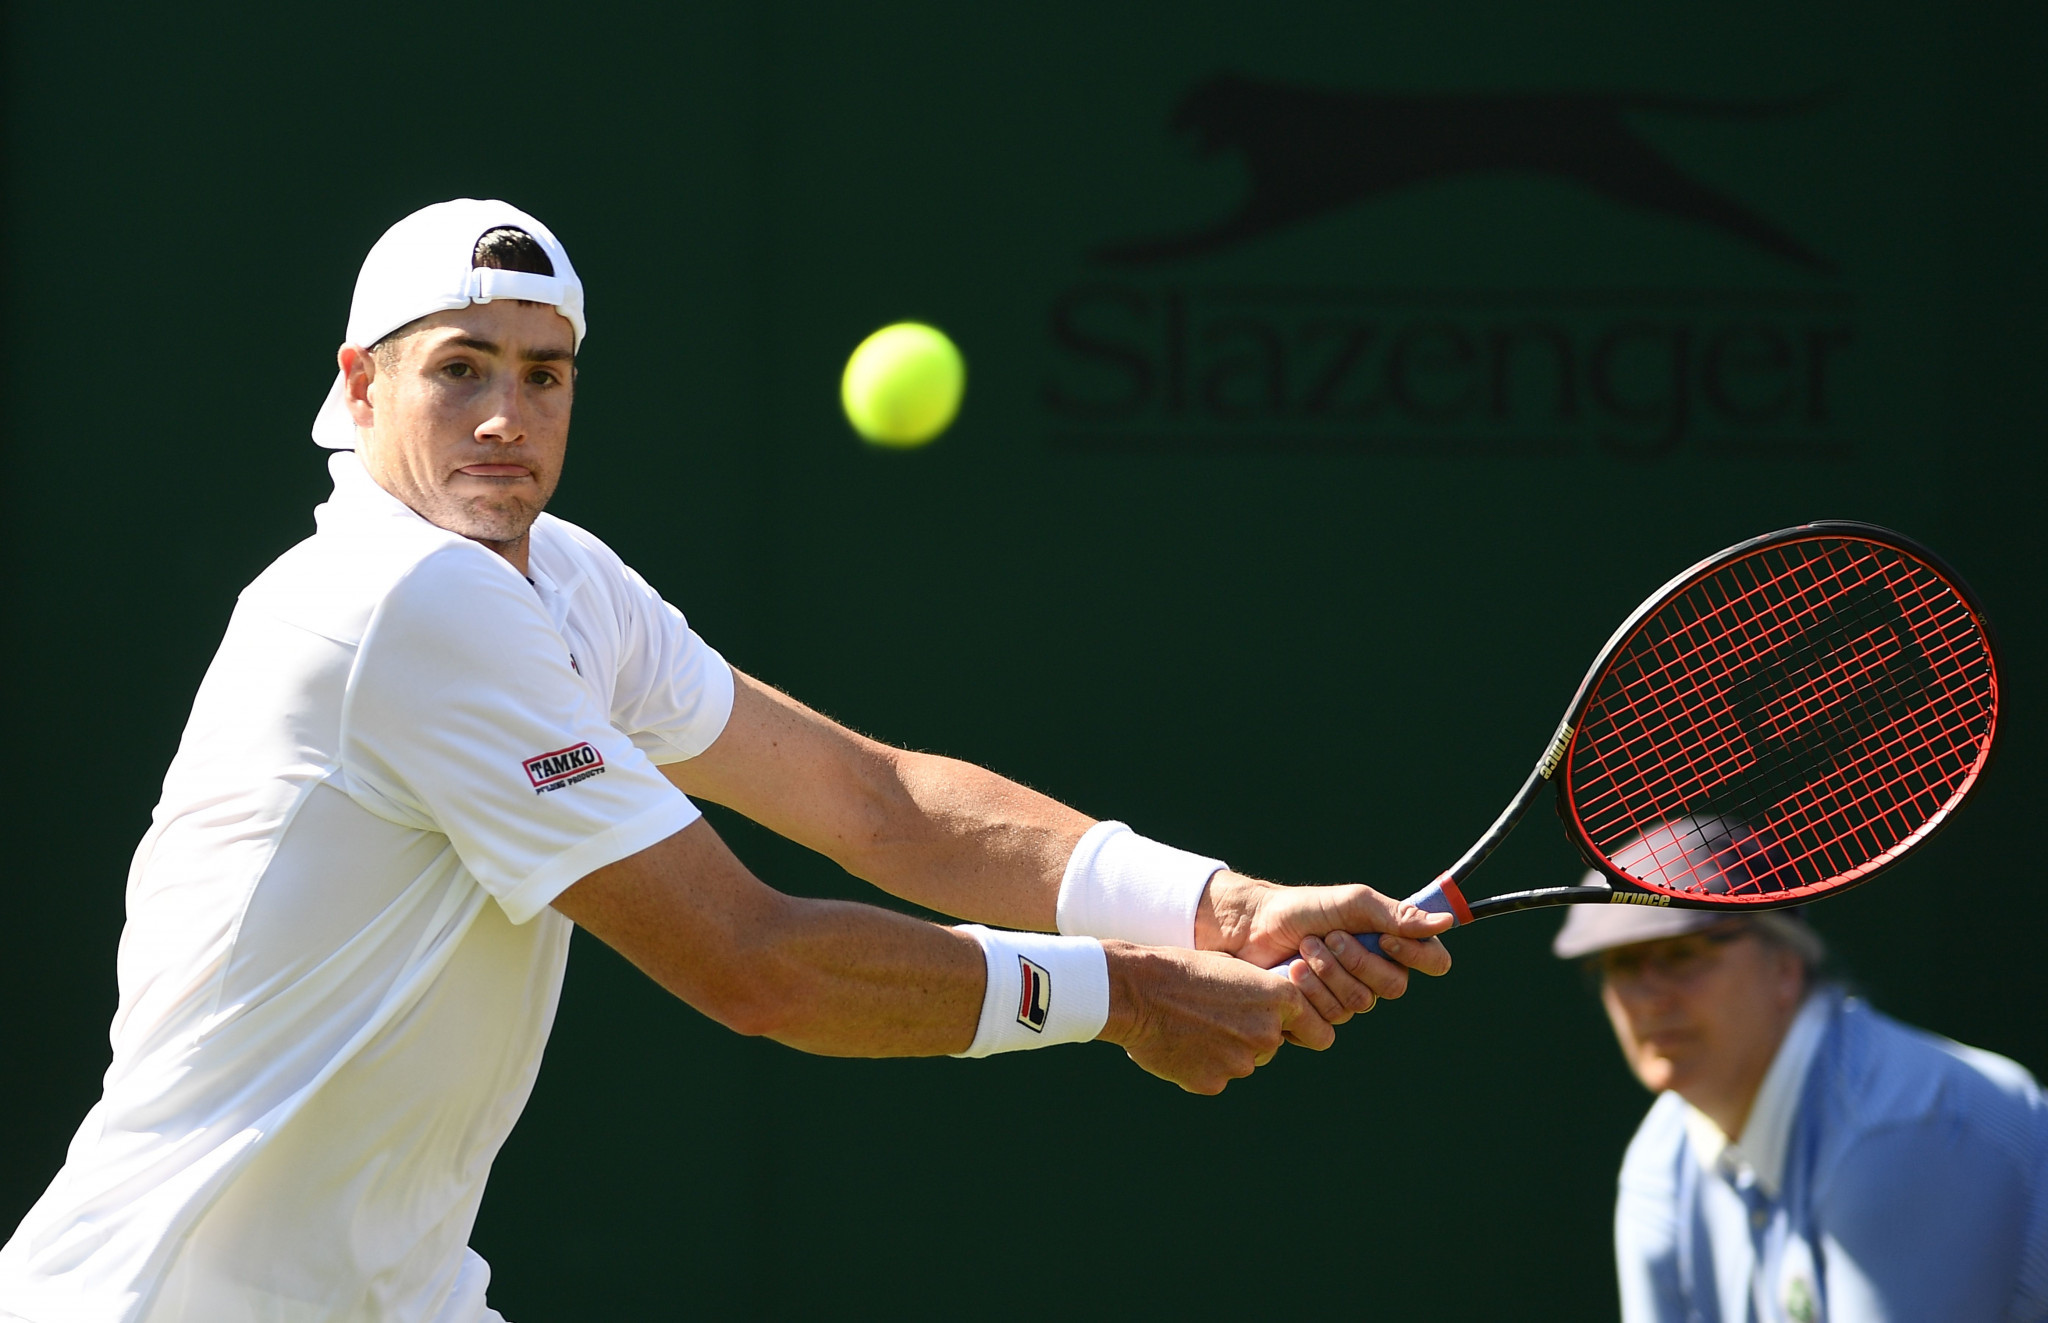 American John Isner has been involved in more than one epic encounter at Wimbledon ©Getty Images